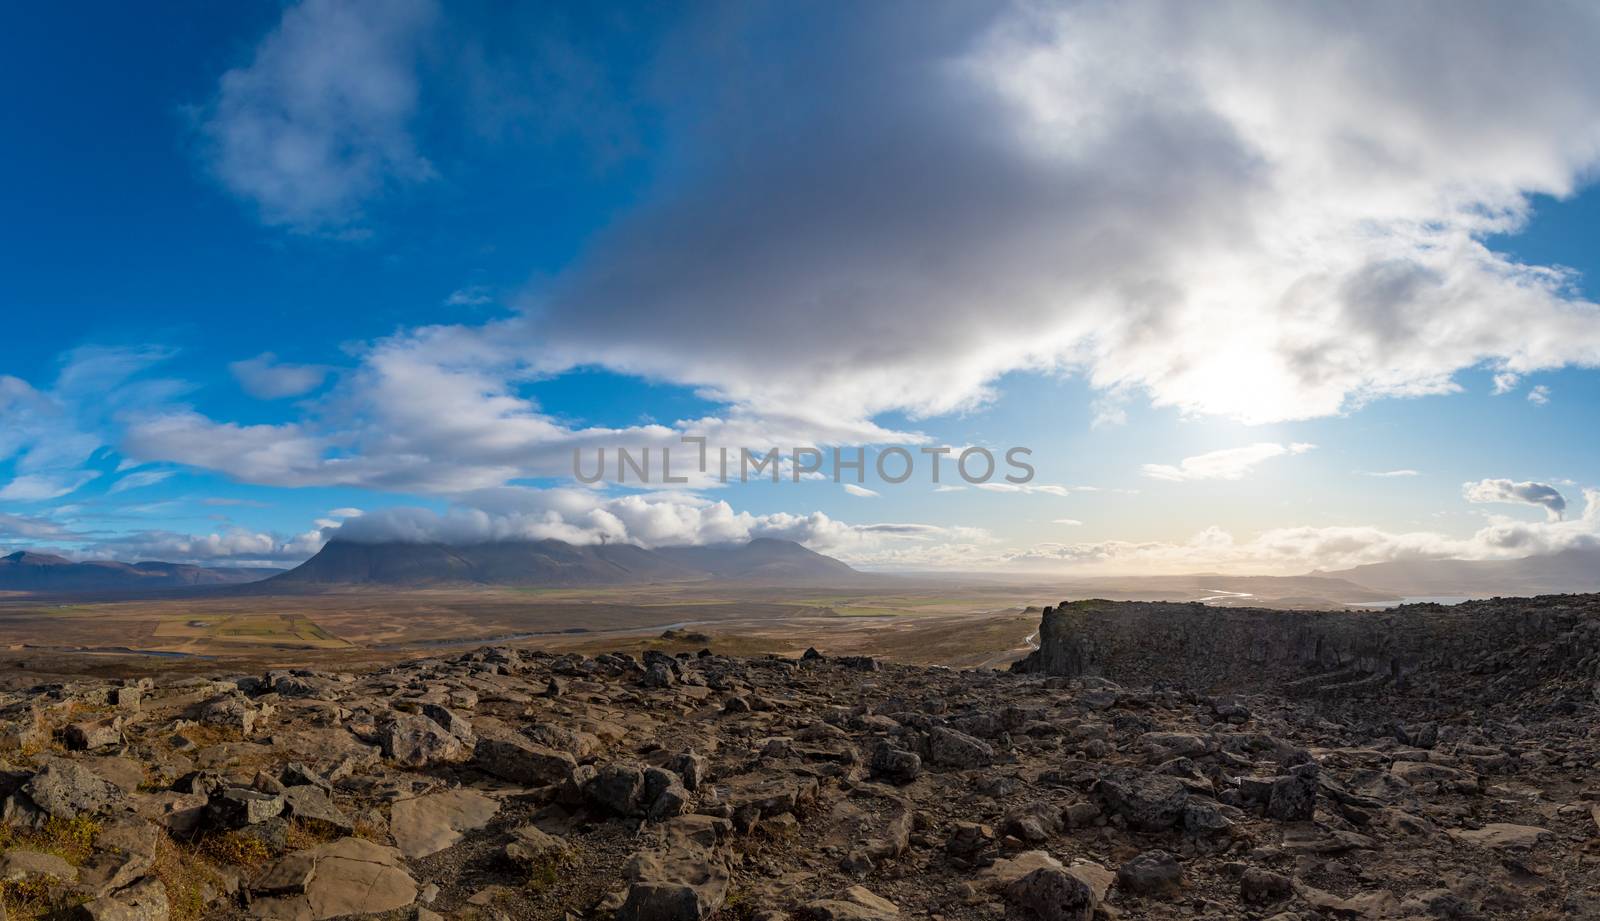 Borgarvirki castle in Iceland panorama from top over stone walls and valley